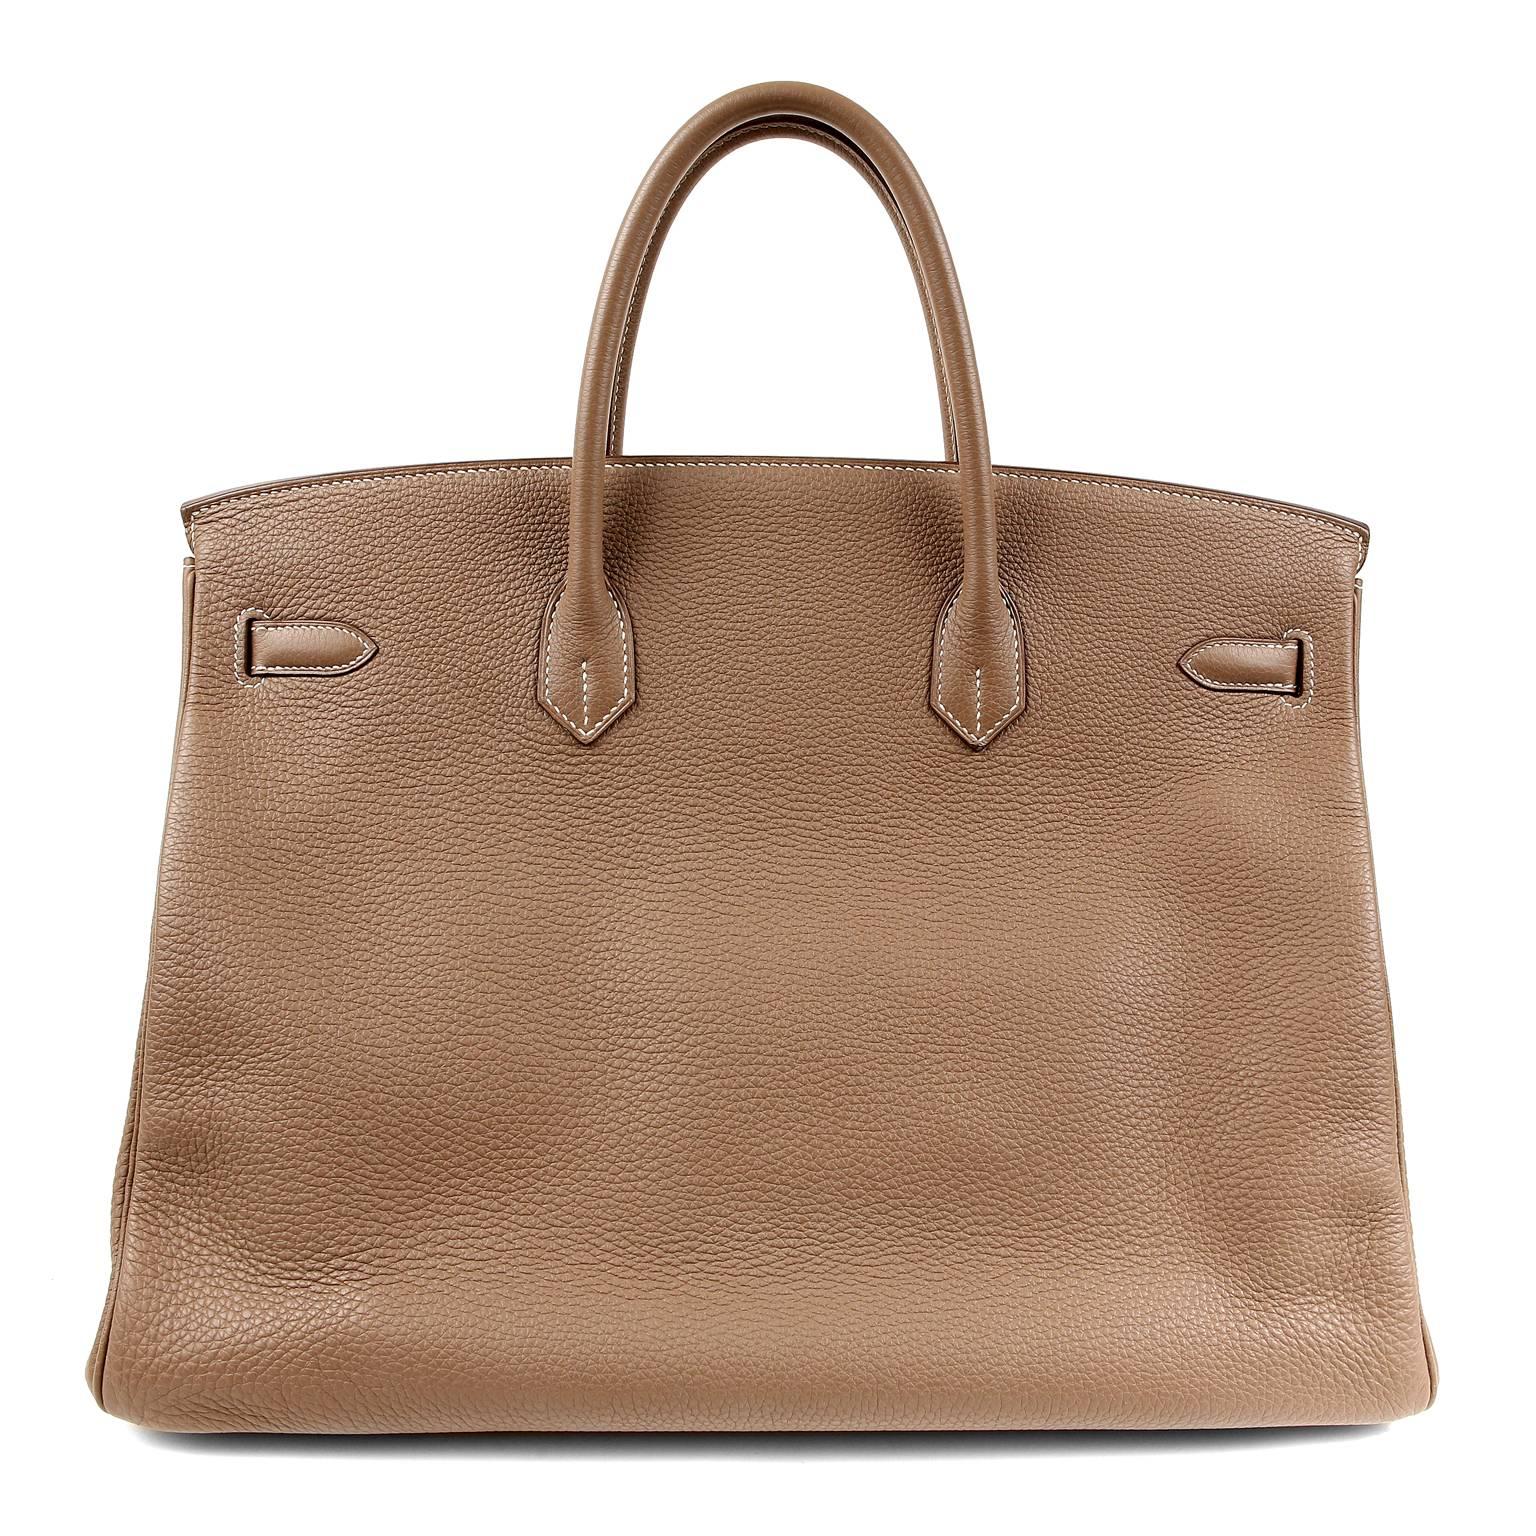 Hermès Etoupe Clemence 40 cm Birkin- Pristine Condition, appearing never carried
 Hermès bags are considered the ultimate luxury item the world over.  Hand stitched by skilled craftsmen, wait lists of a year or more are commonplace.  Etoupe is a